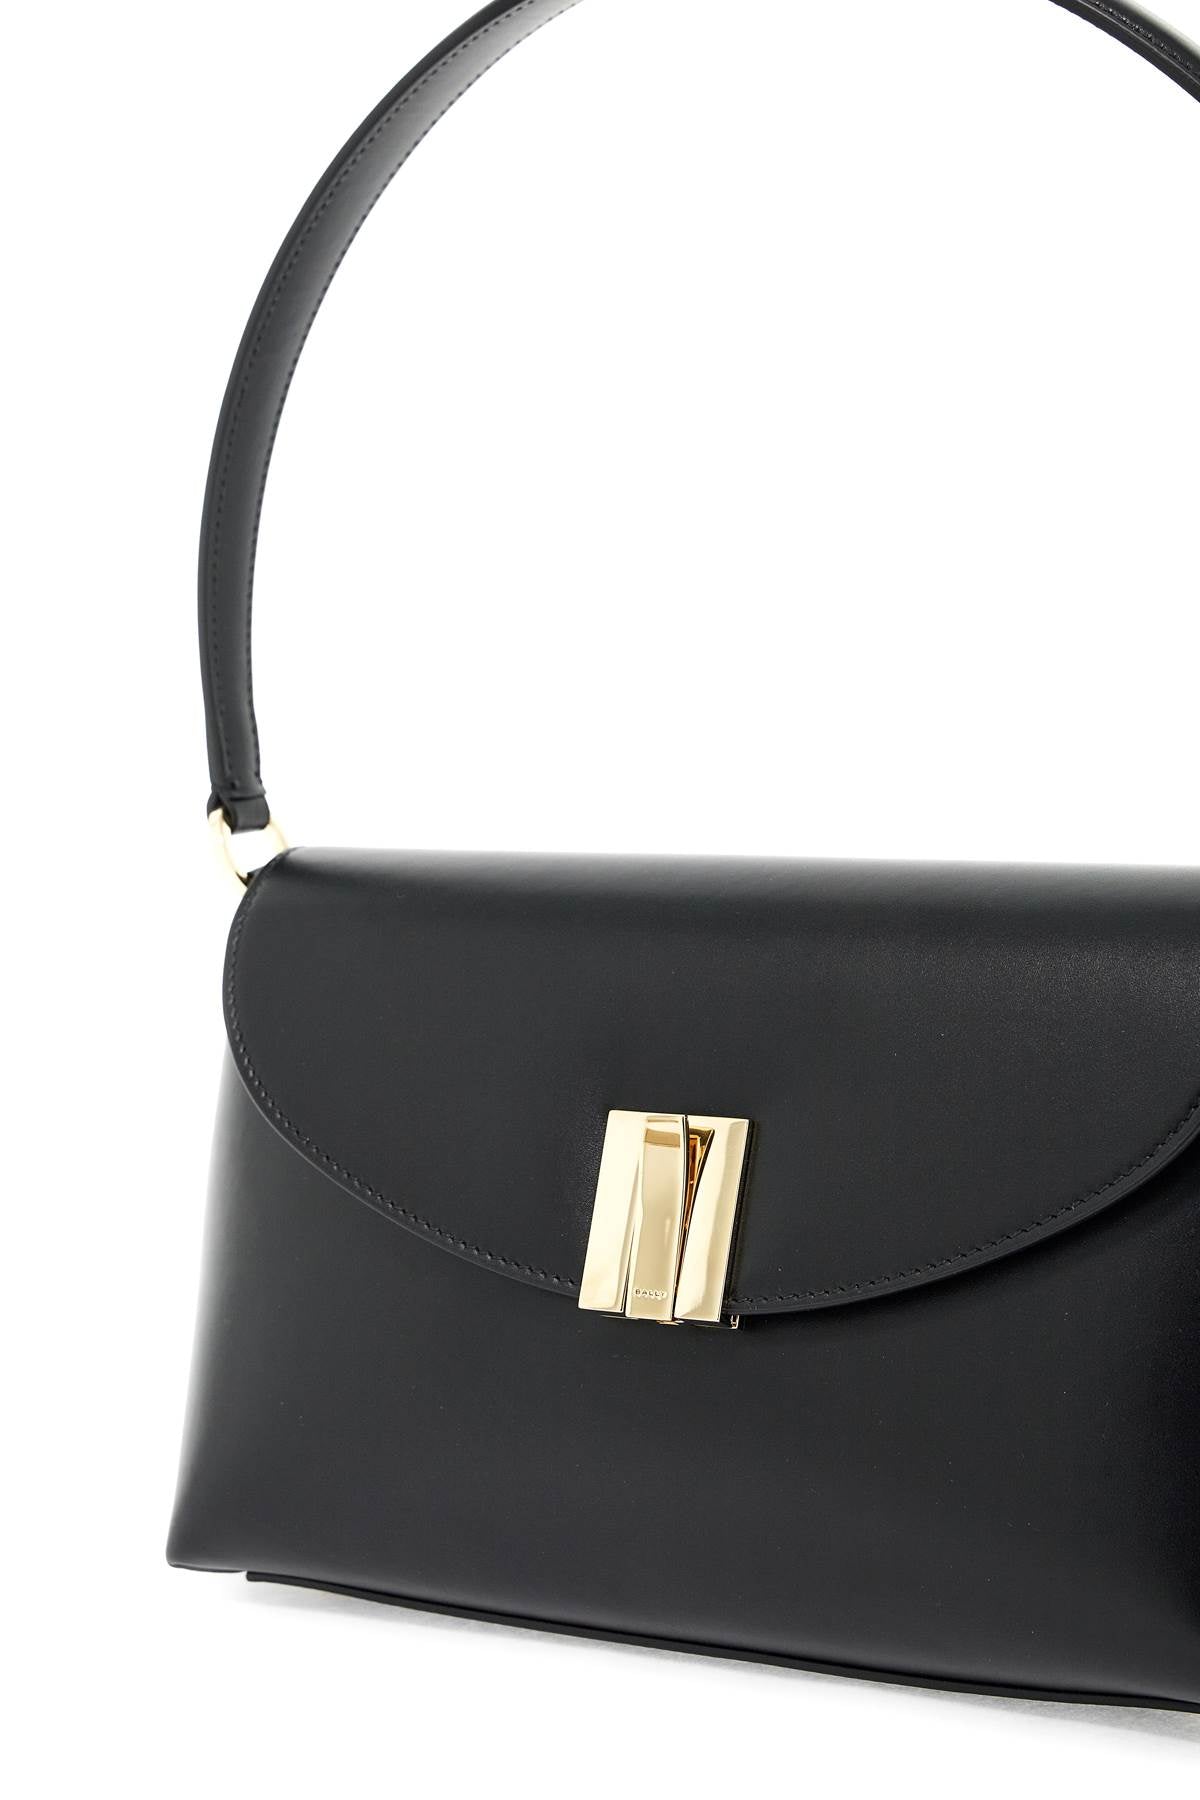 Bally "ollam Leather Shoulder Bagreplace With Double Quote   Black